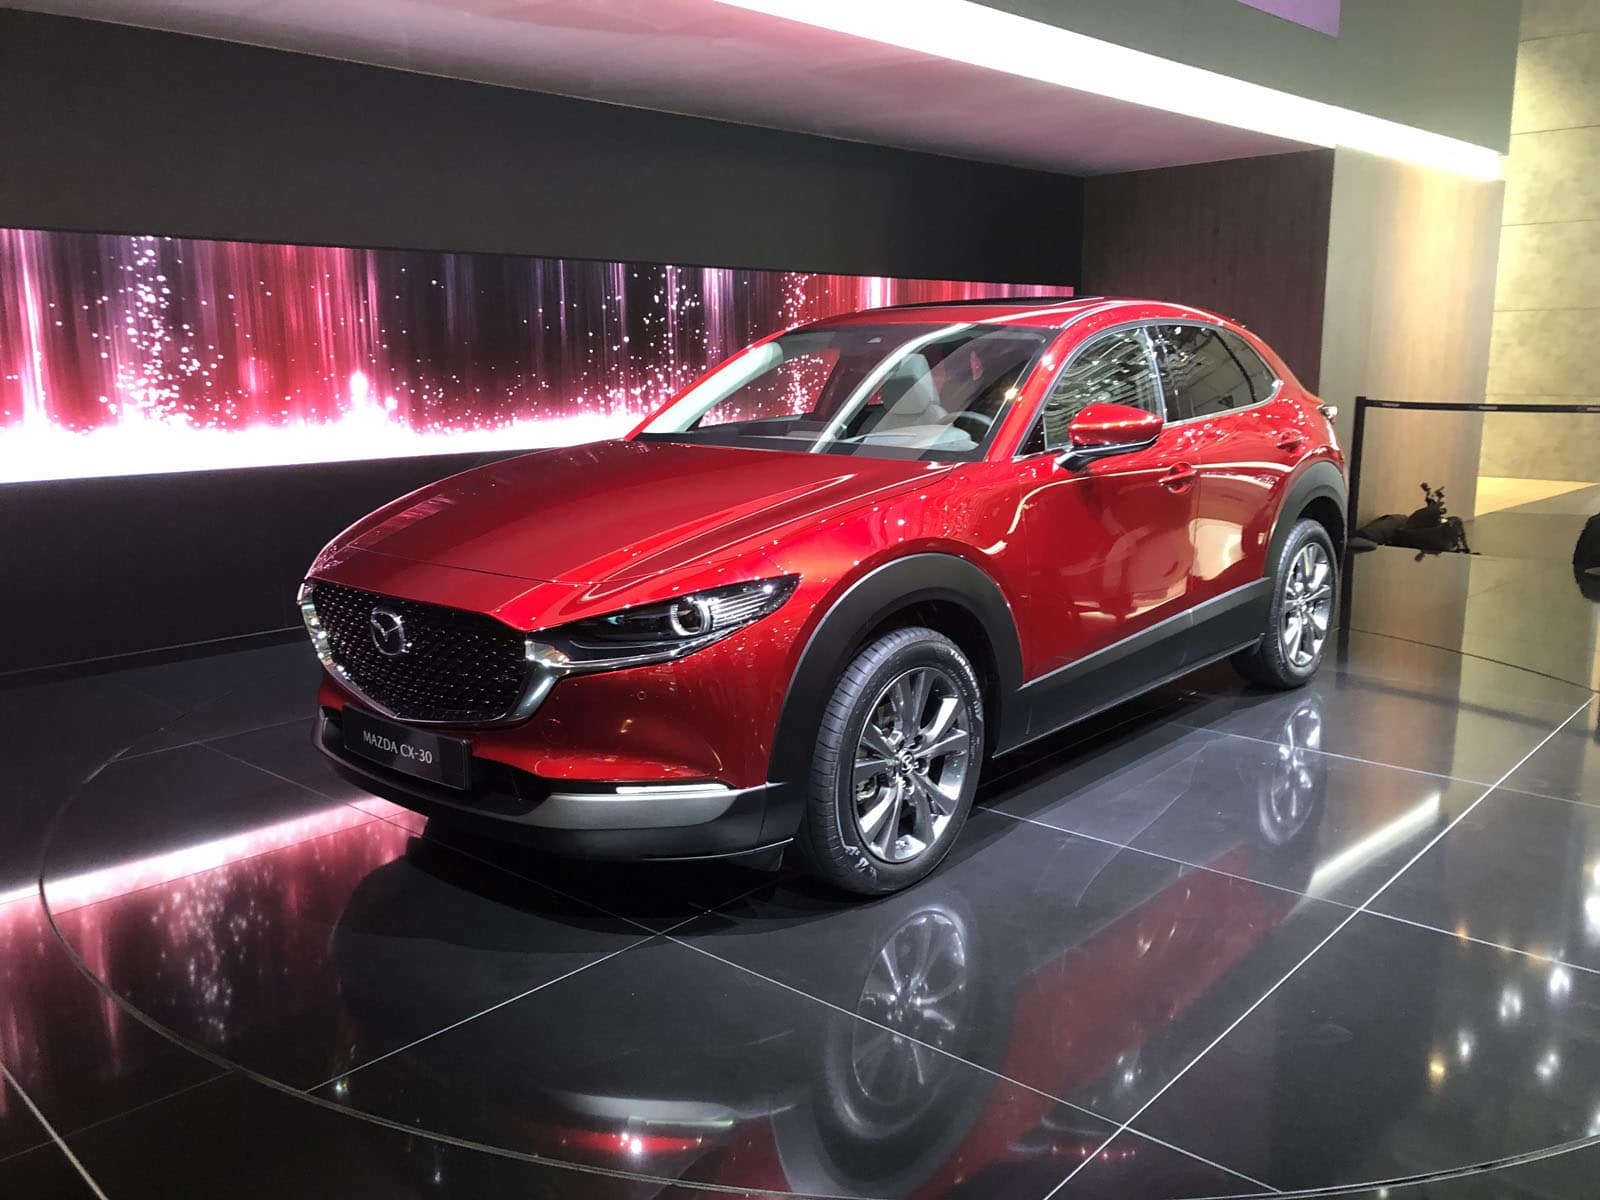 Who Does The New 2020 Mazda CX 30 Compete With?